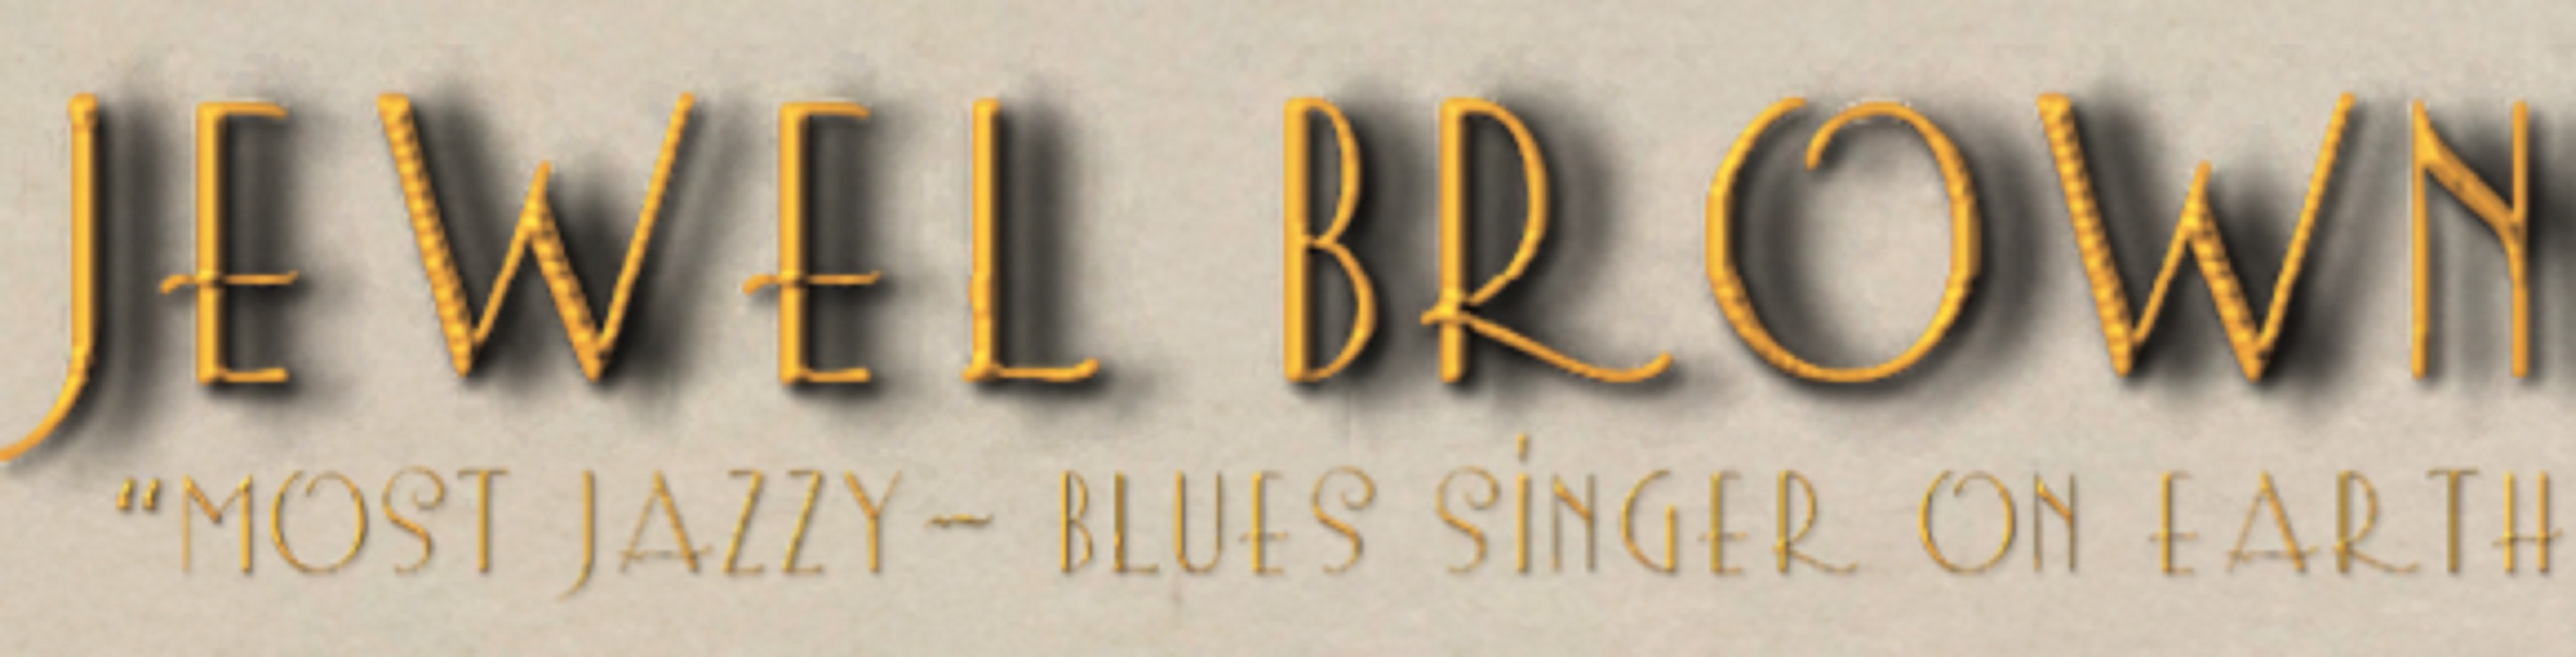 Legendary blues treasure Jewel Brown releases "Thanks for Good Ole’ Music and Memories"